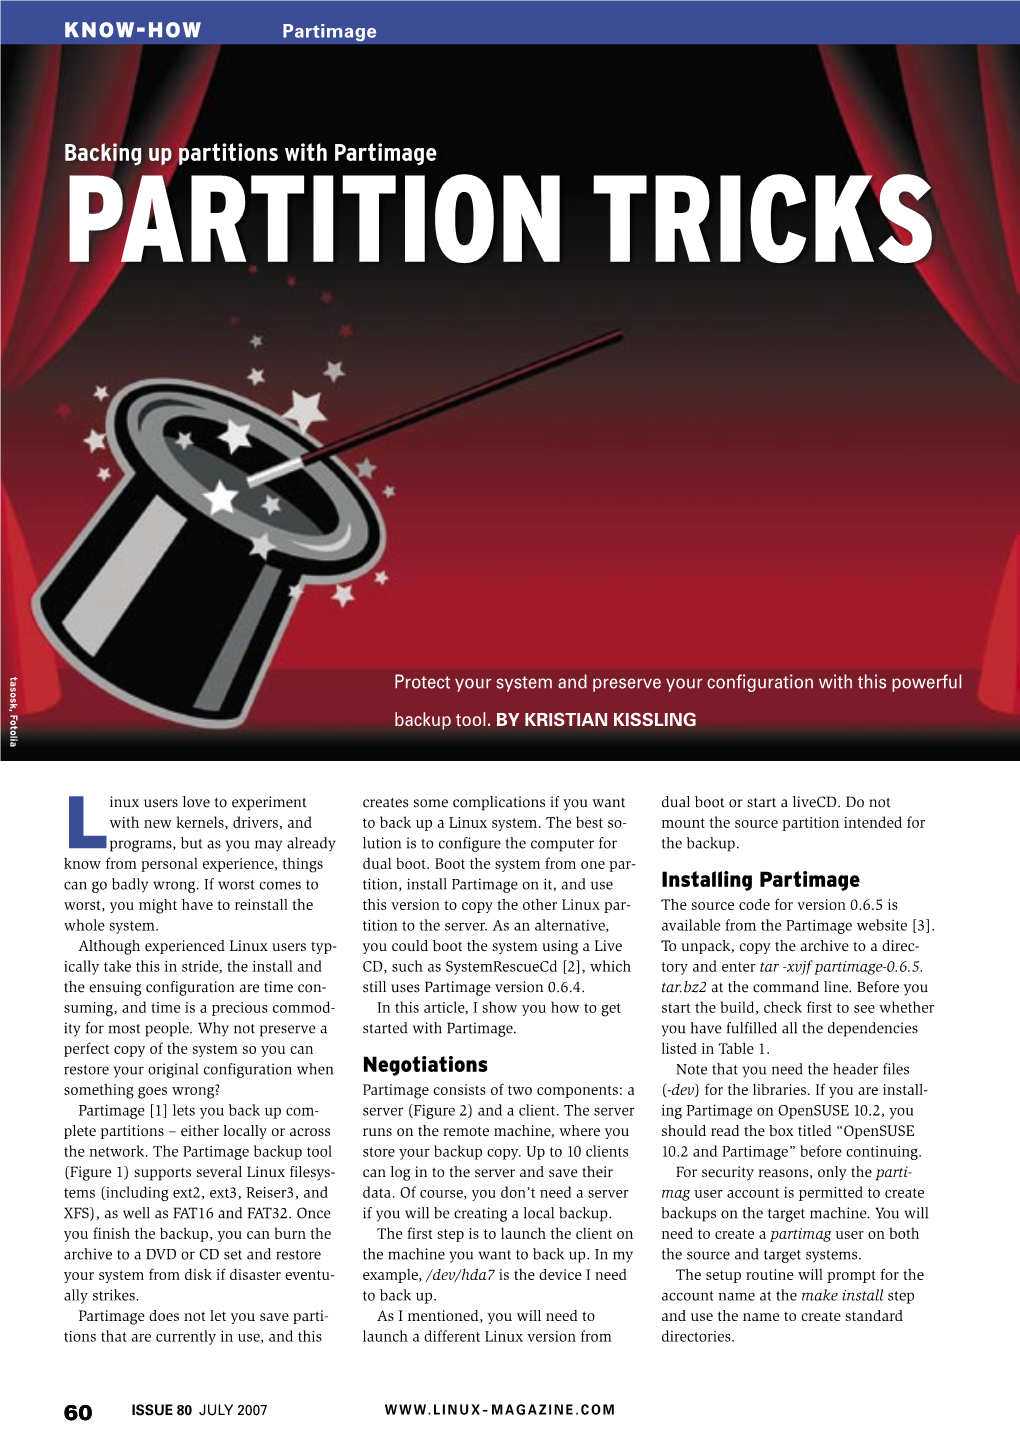 Backing up Partitions with Partimage PARTITION TRICKS